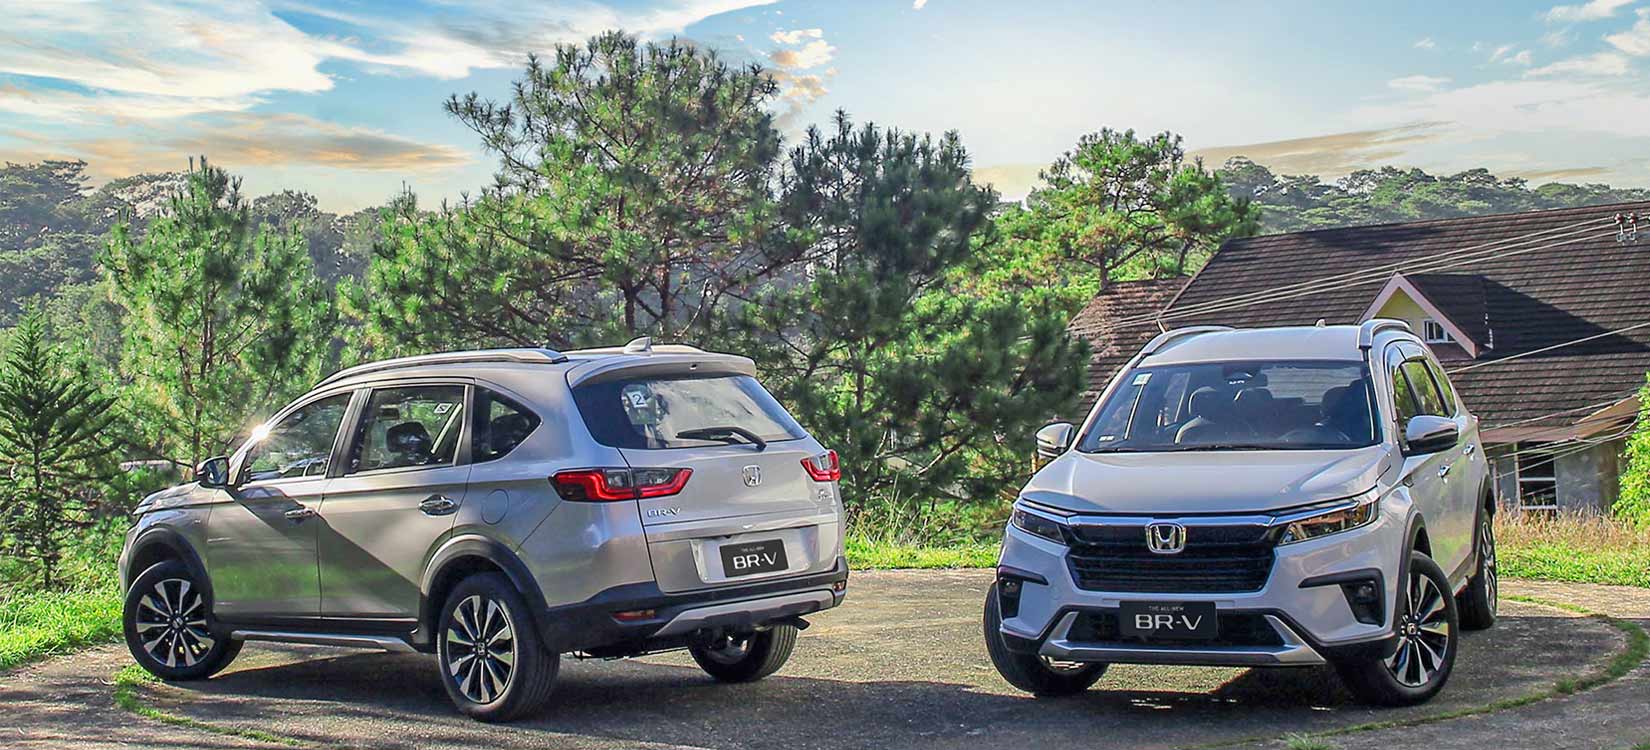 All-New Honda BR-V Media Drive in the City of Pines